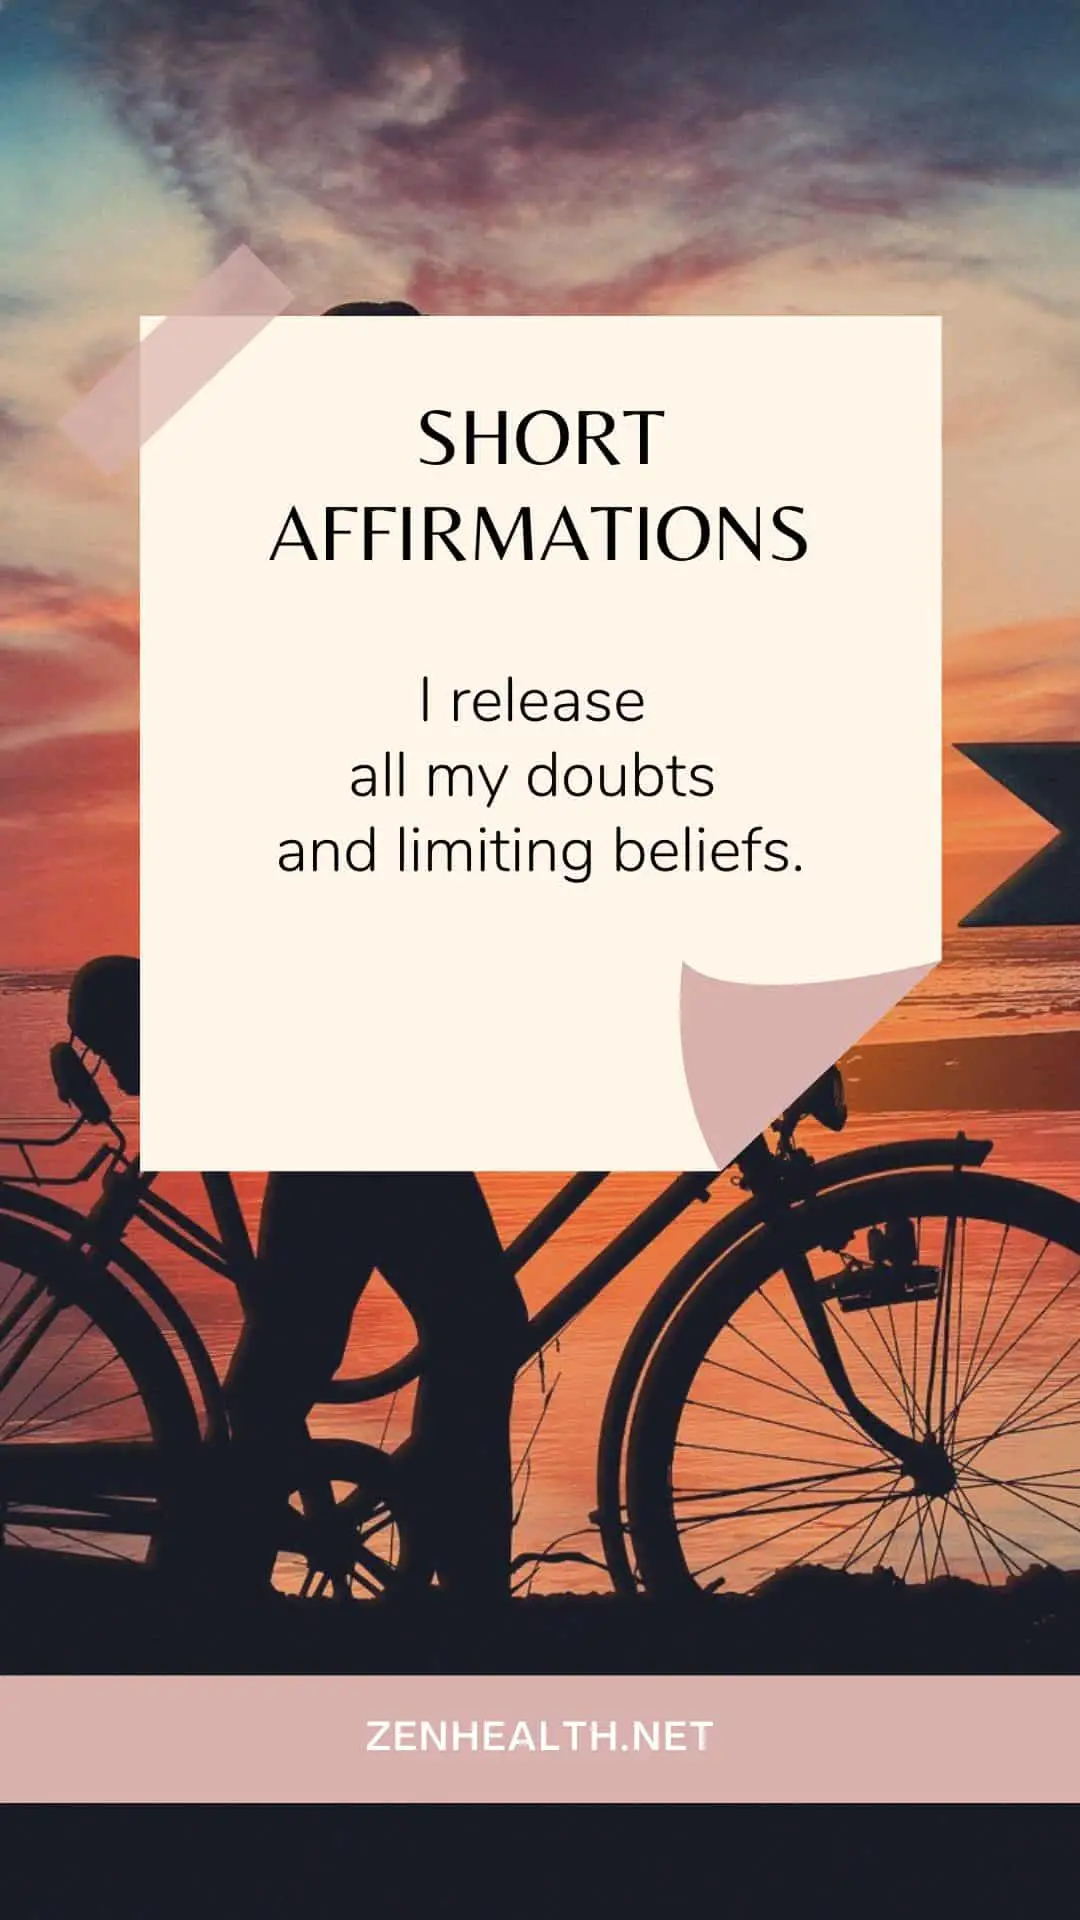 short affirmations: I release all my doubts and limiting beliefs